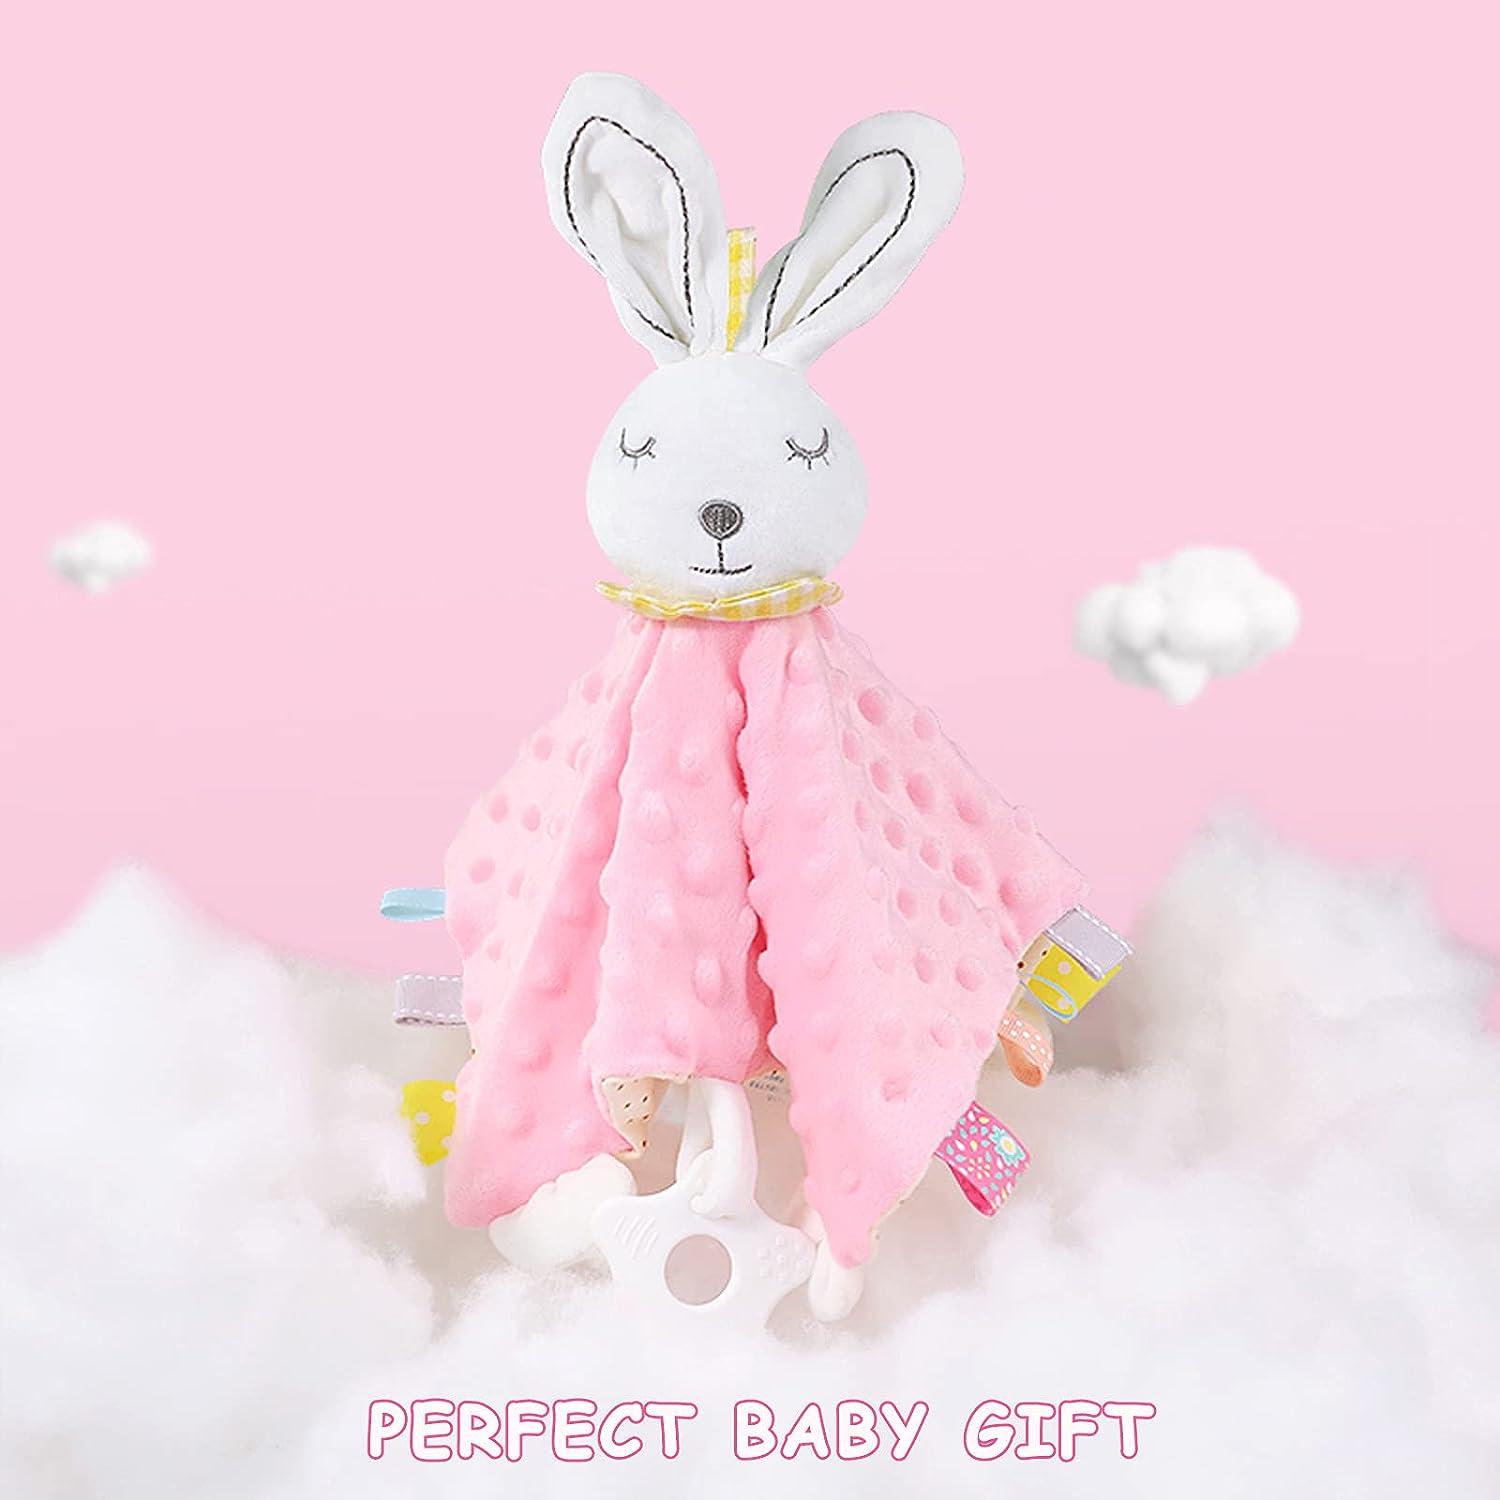 Bunny Tags Soft Minky Plush Sensory Textured Soothing Taggy Teether Pink Blanket Infant Blanket Upalupa Puppy Super Toy Nowborn Colorful Dot Security with Security Blanket for Security Stuffed Lovey Animal Baby Baby